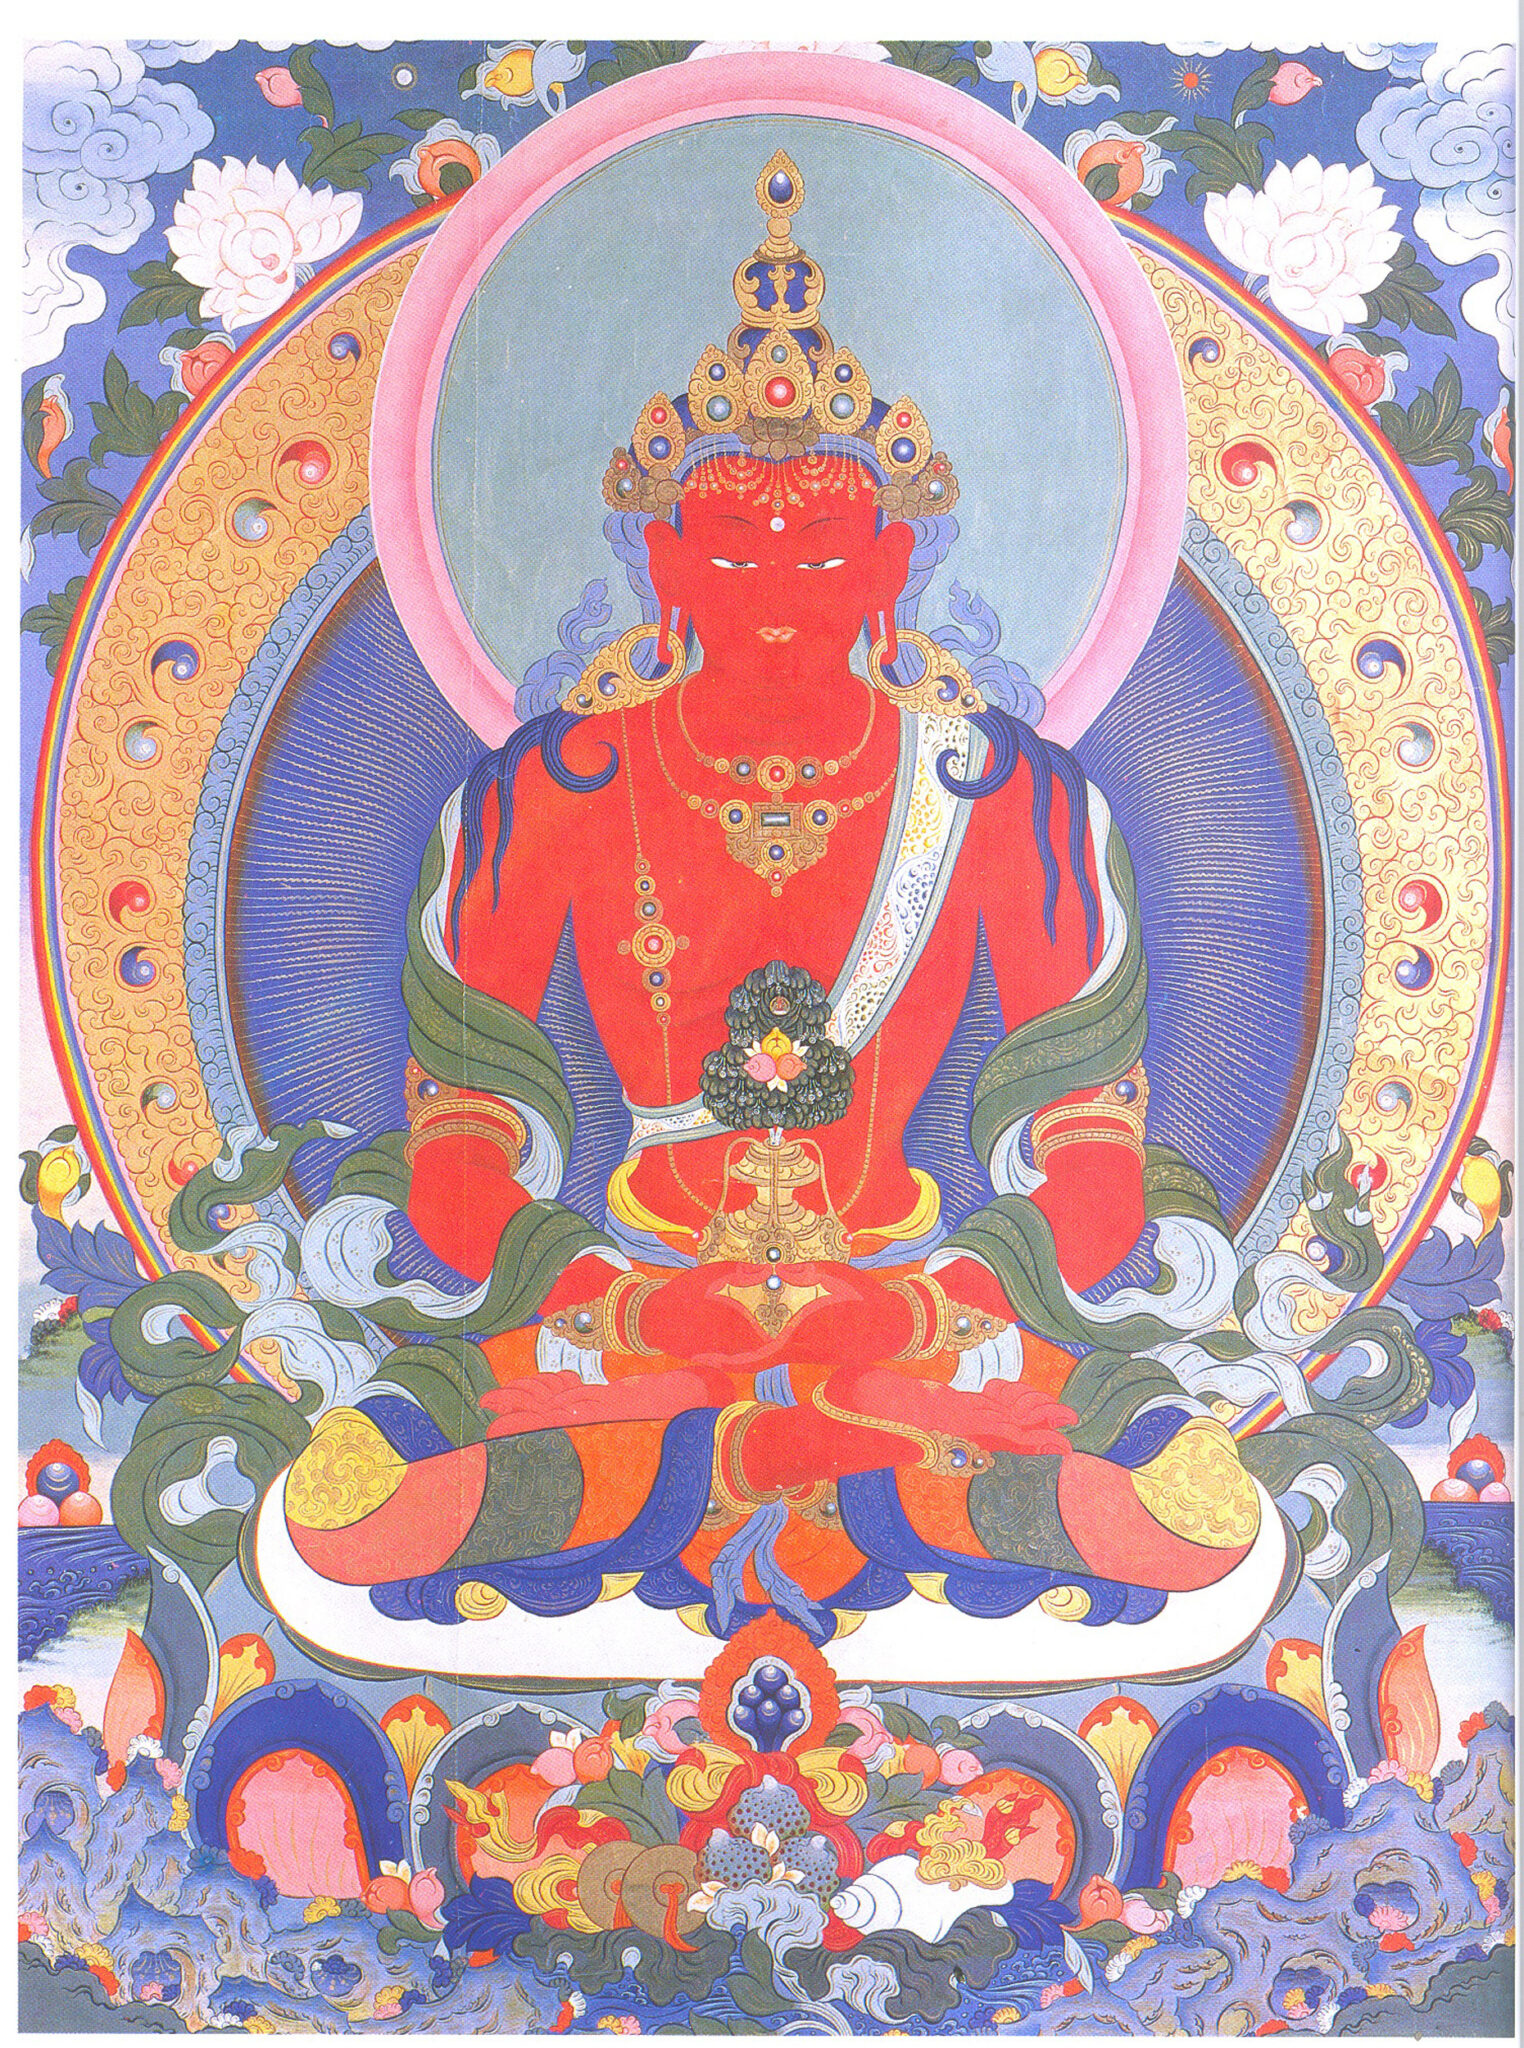 Crowned deity with red skin, wearing swirling sashes about arms, holds vessel with blossoms in lap